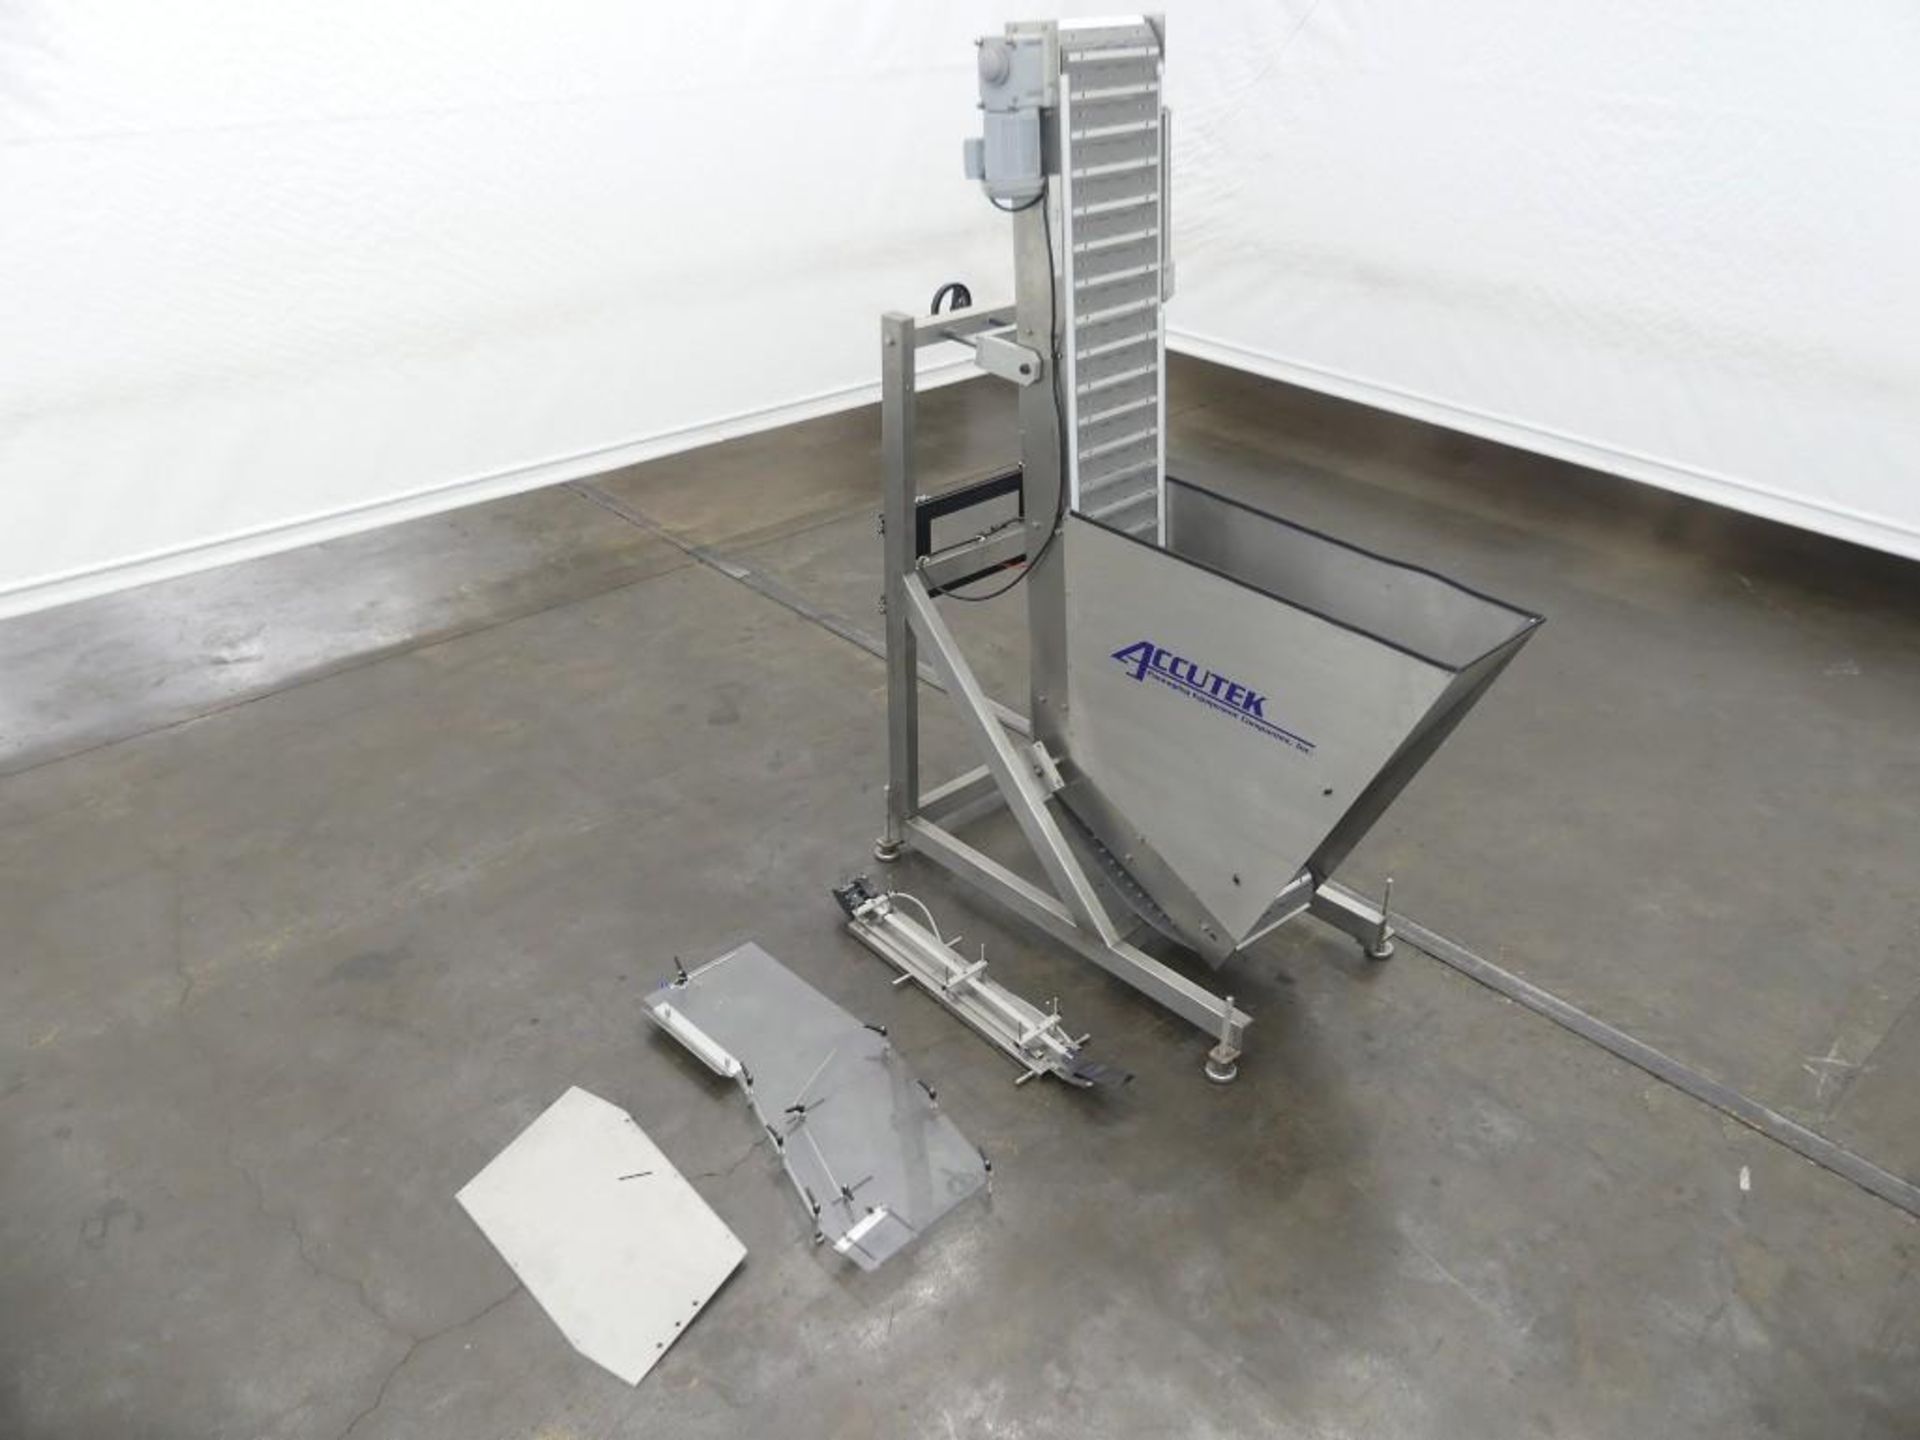 2019 AccuTek Packaging Equipment Co. 50-C0E-CH2 Stainless Steel Cap Loader Elevator - Image 5 of 25